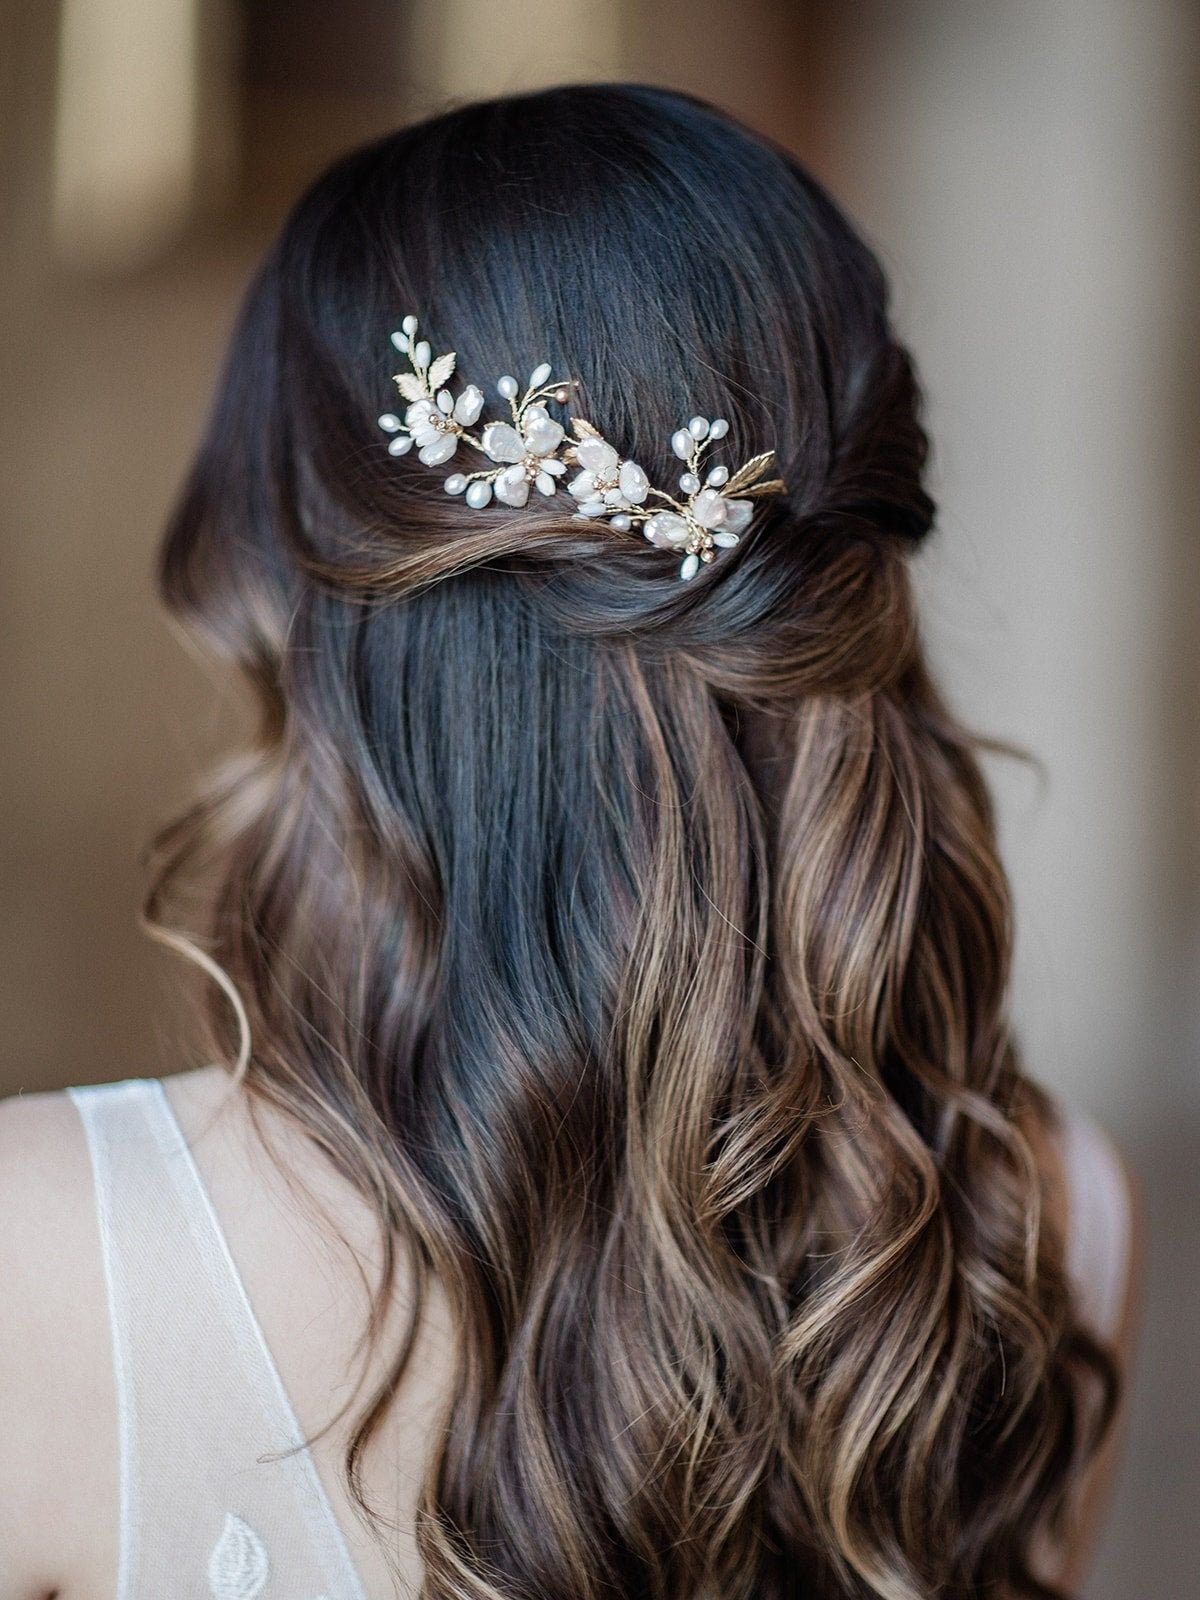 Stunning Bridal Hairstyles for Your Perfect Wedding Day Look